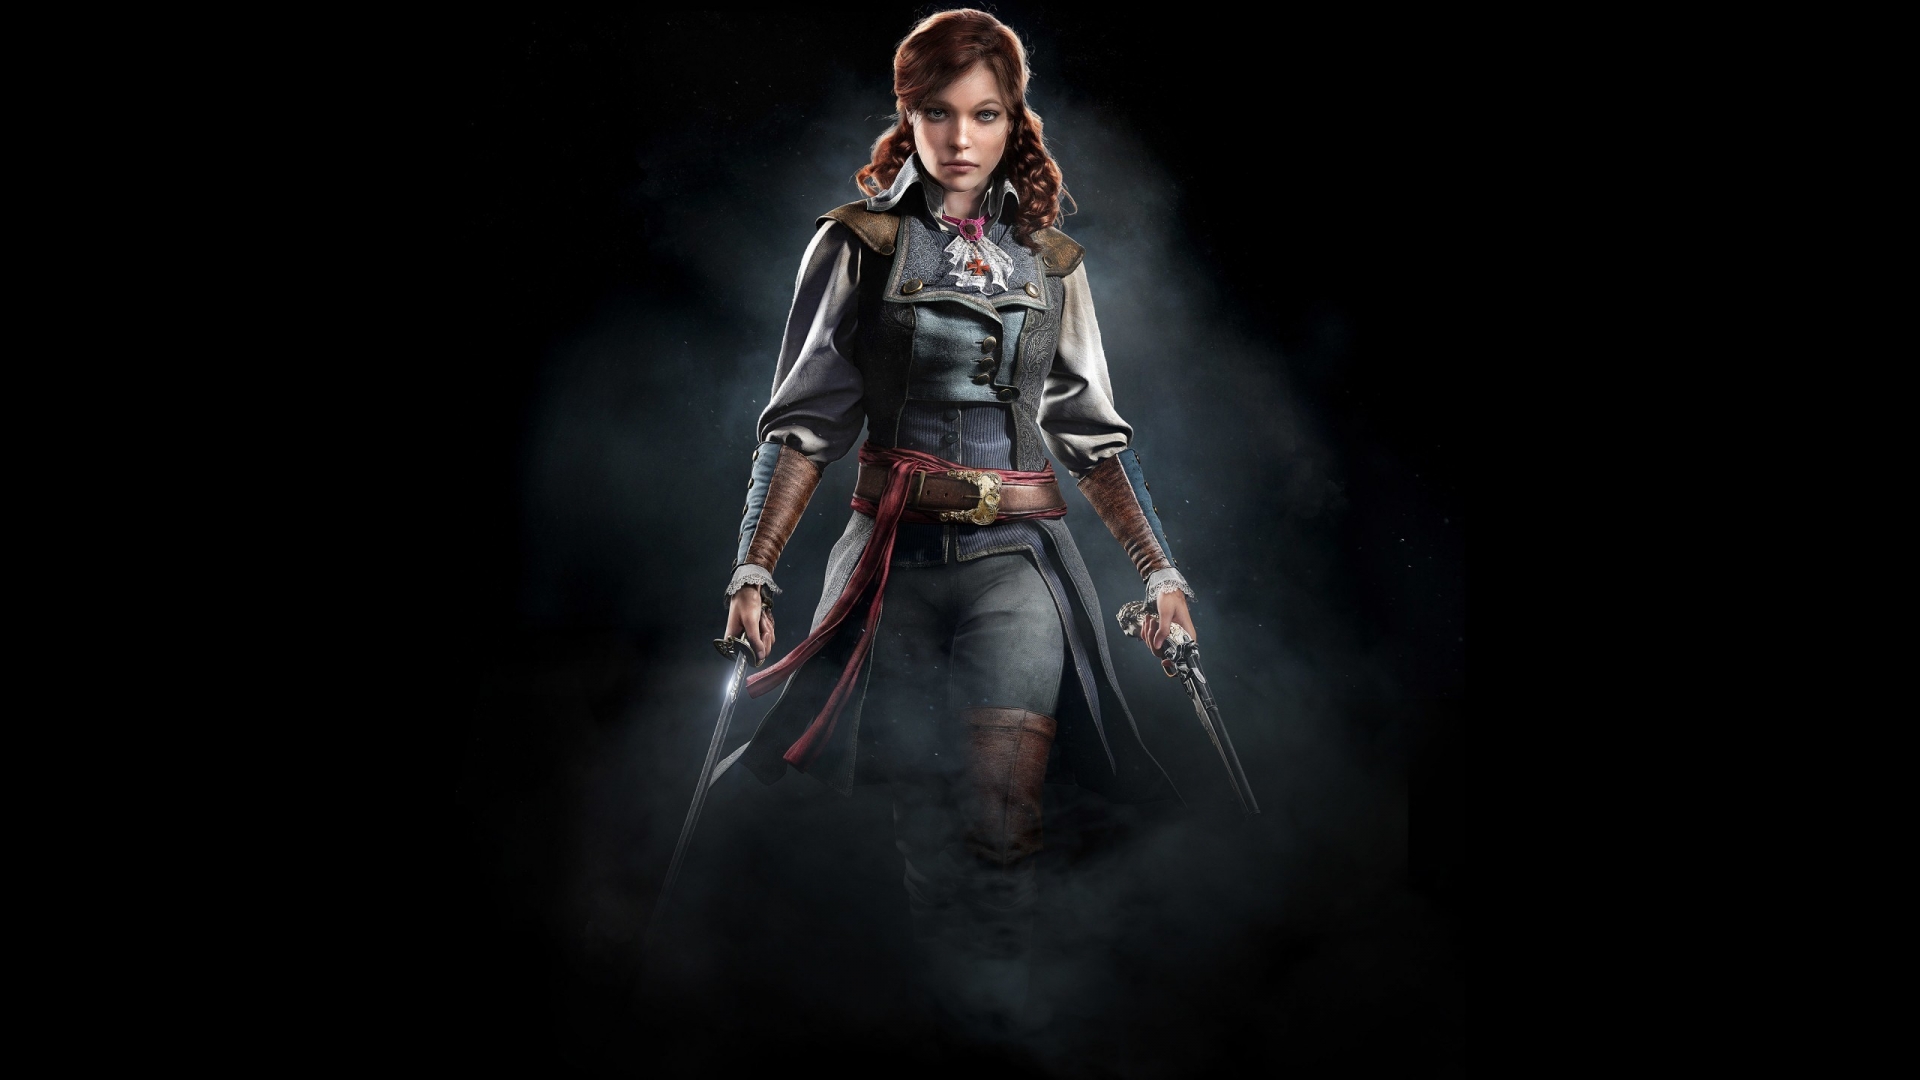 Elise Assassins Creed Unity  for 1920 x 1080 HDTV 1080p resolution